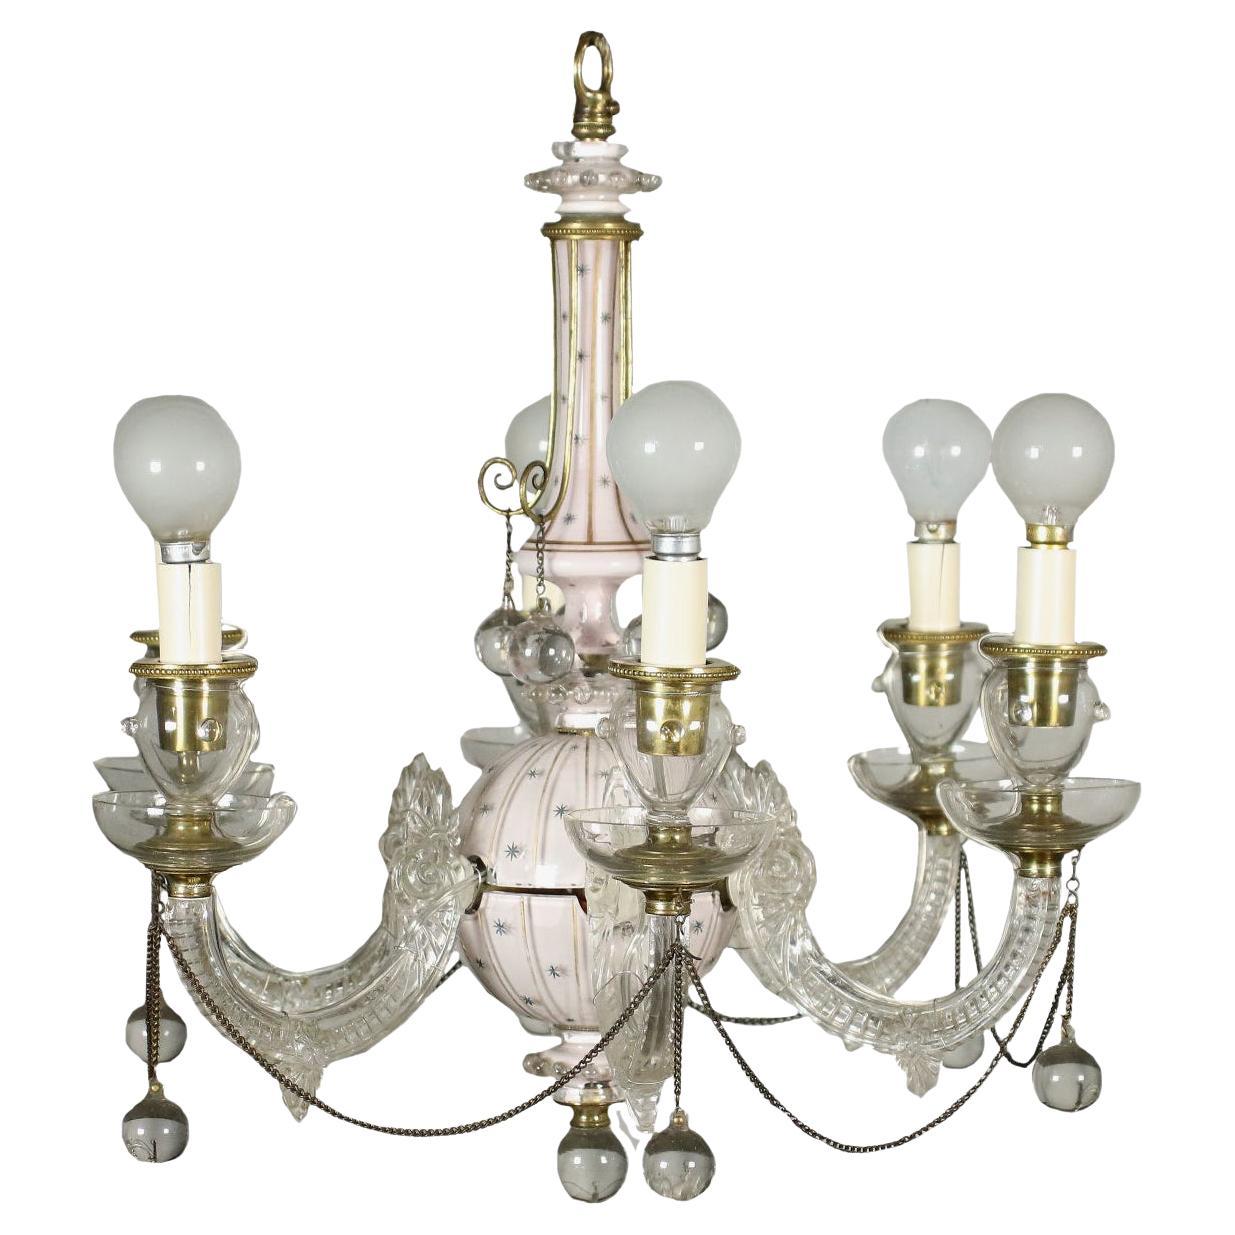 English painted glass chandelier. The central body is turned in the upper part, taking the shape of a sphere in the lower one. The thick glass is back-painted in pink, while the outermost part is adorned with small stars, also painted in blue, and